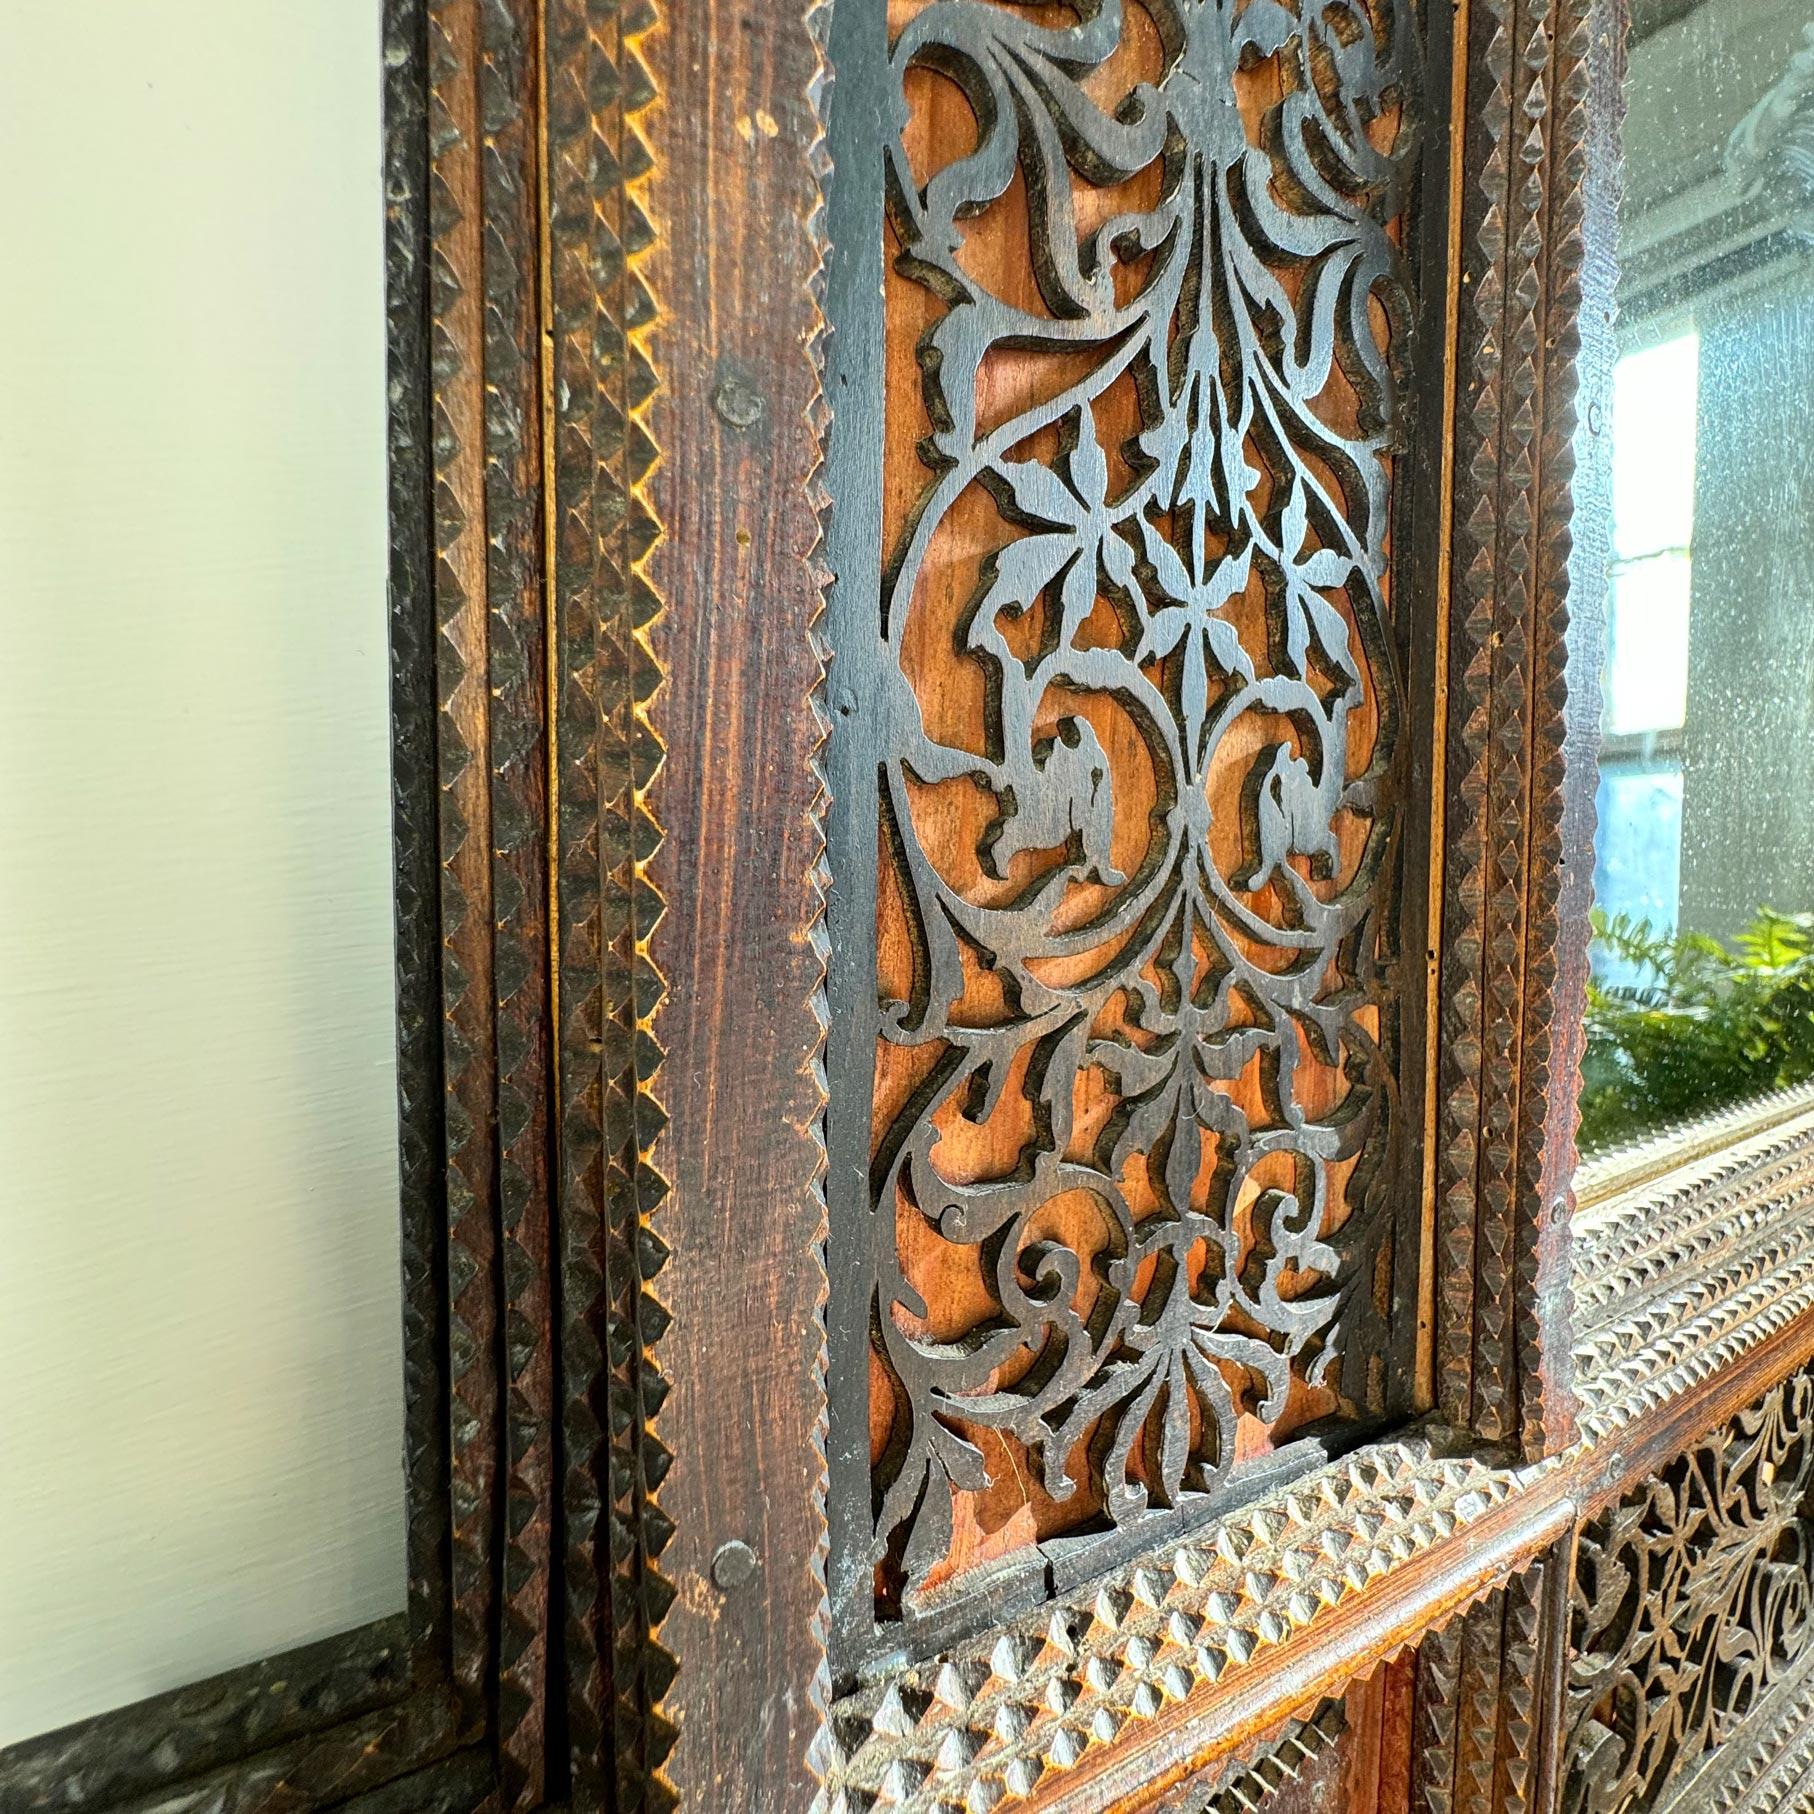 19th Century German Crested Tramp Art Mirror with Fretwork Detailing For Sale 6